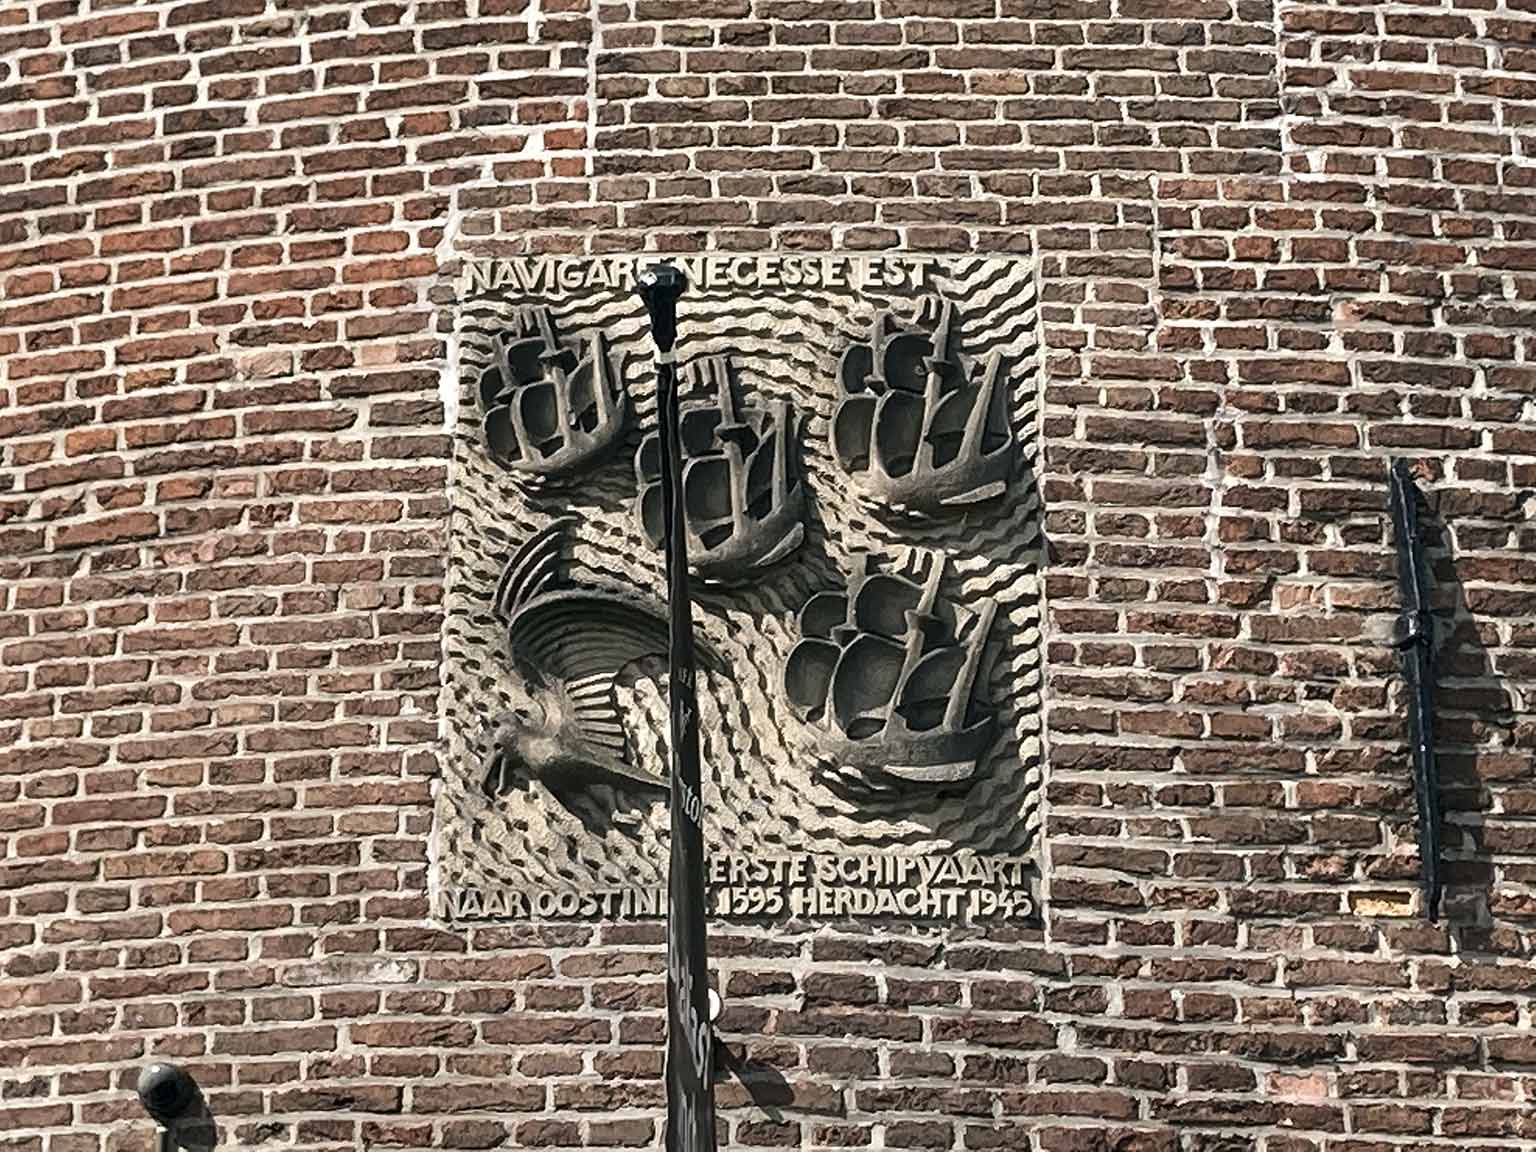 Plaque on Schreierstoren, Amsterdam, to remember the first ship to the East Indies in 1595